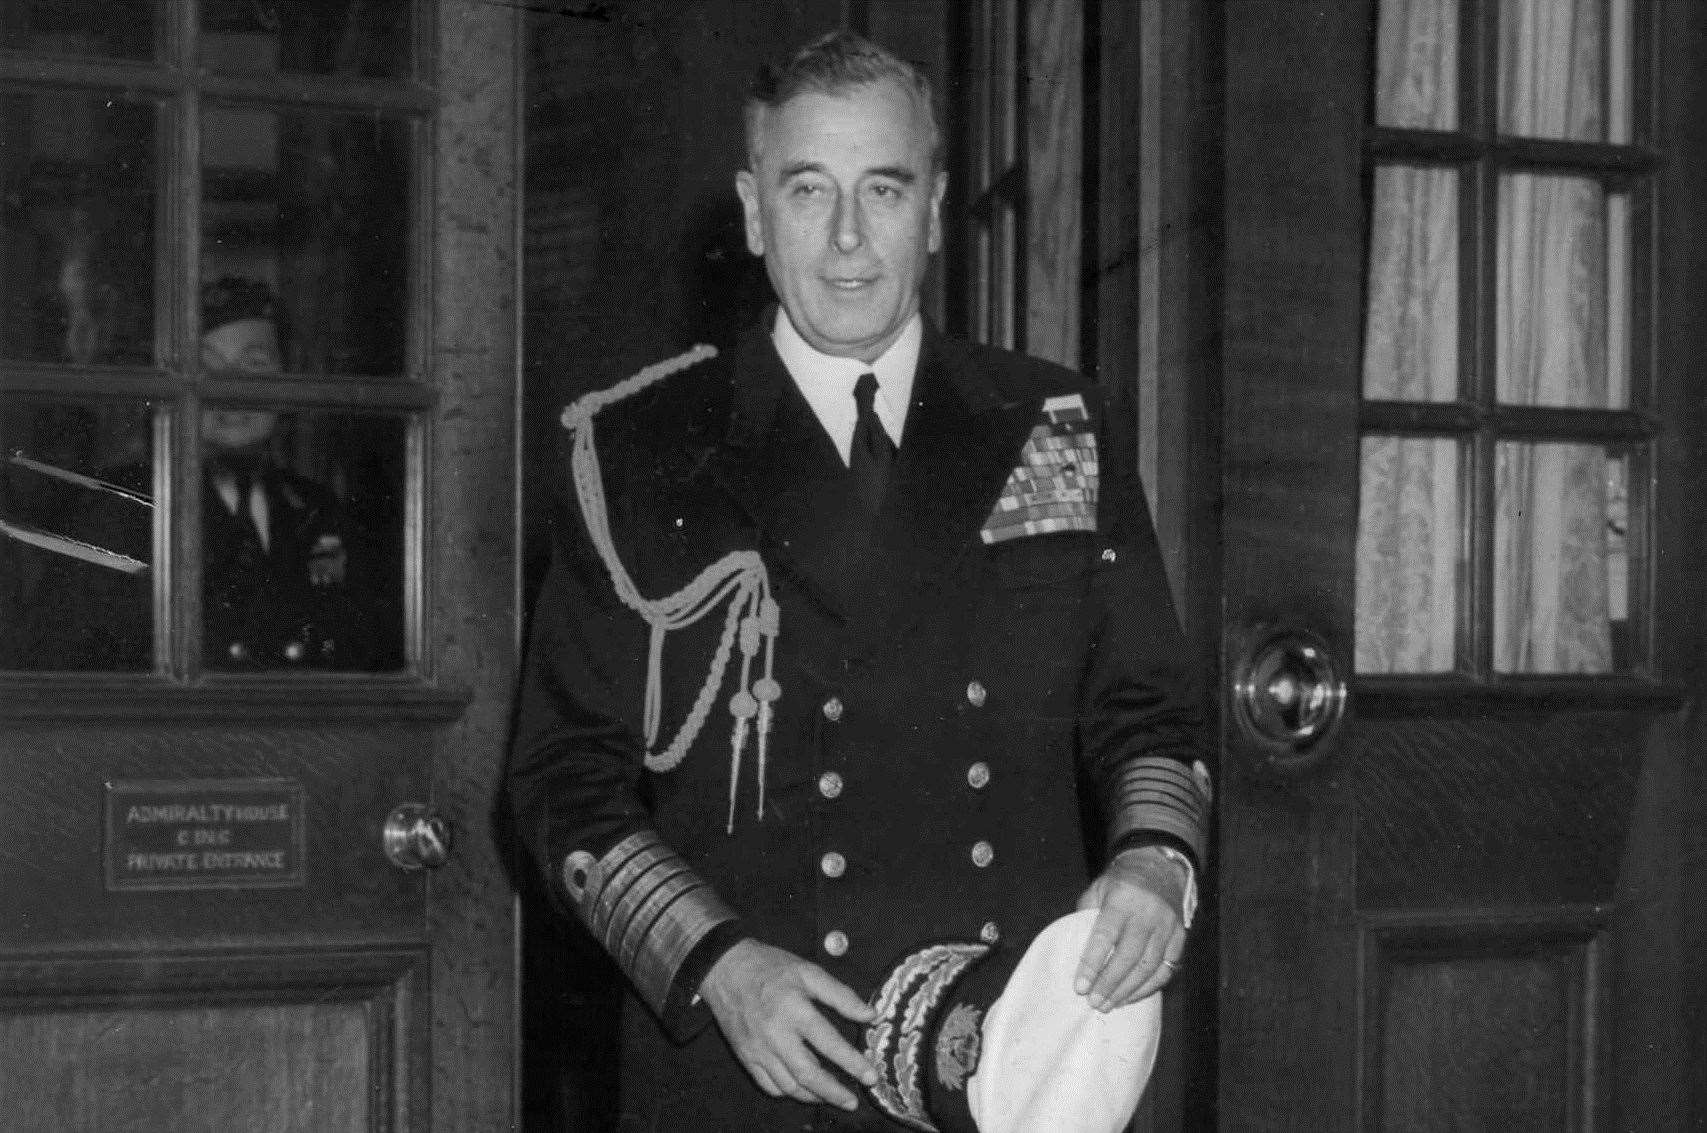 Lord Mountbatten in 1959 - he was the target of the IRA bomb in 1979